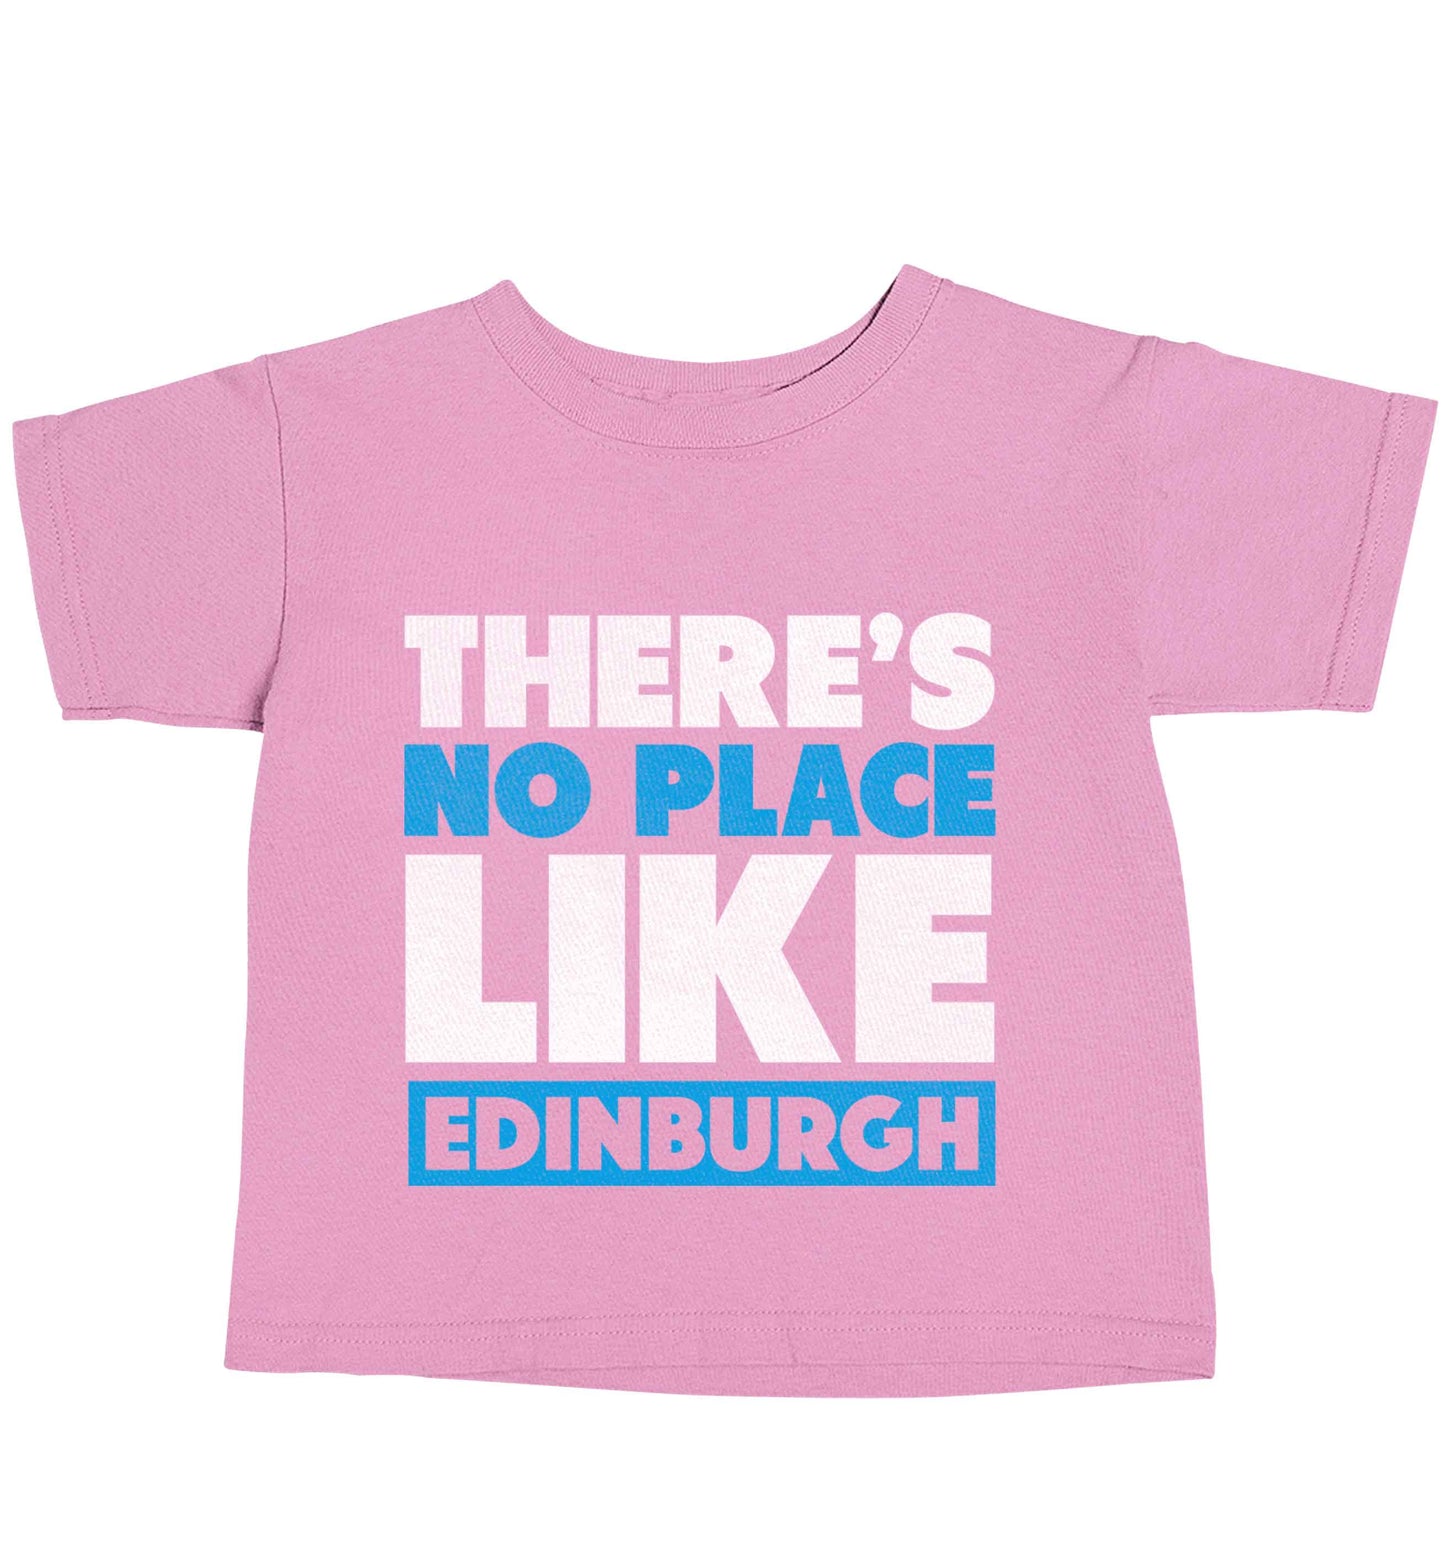 There's no place like Edinburgh light pink baby toddler Tshirt 2 Years